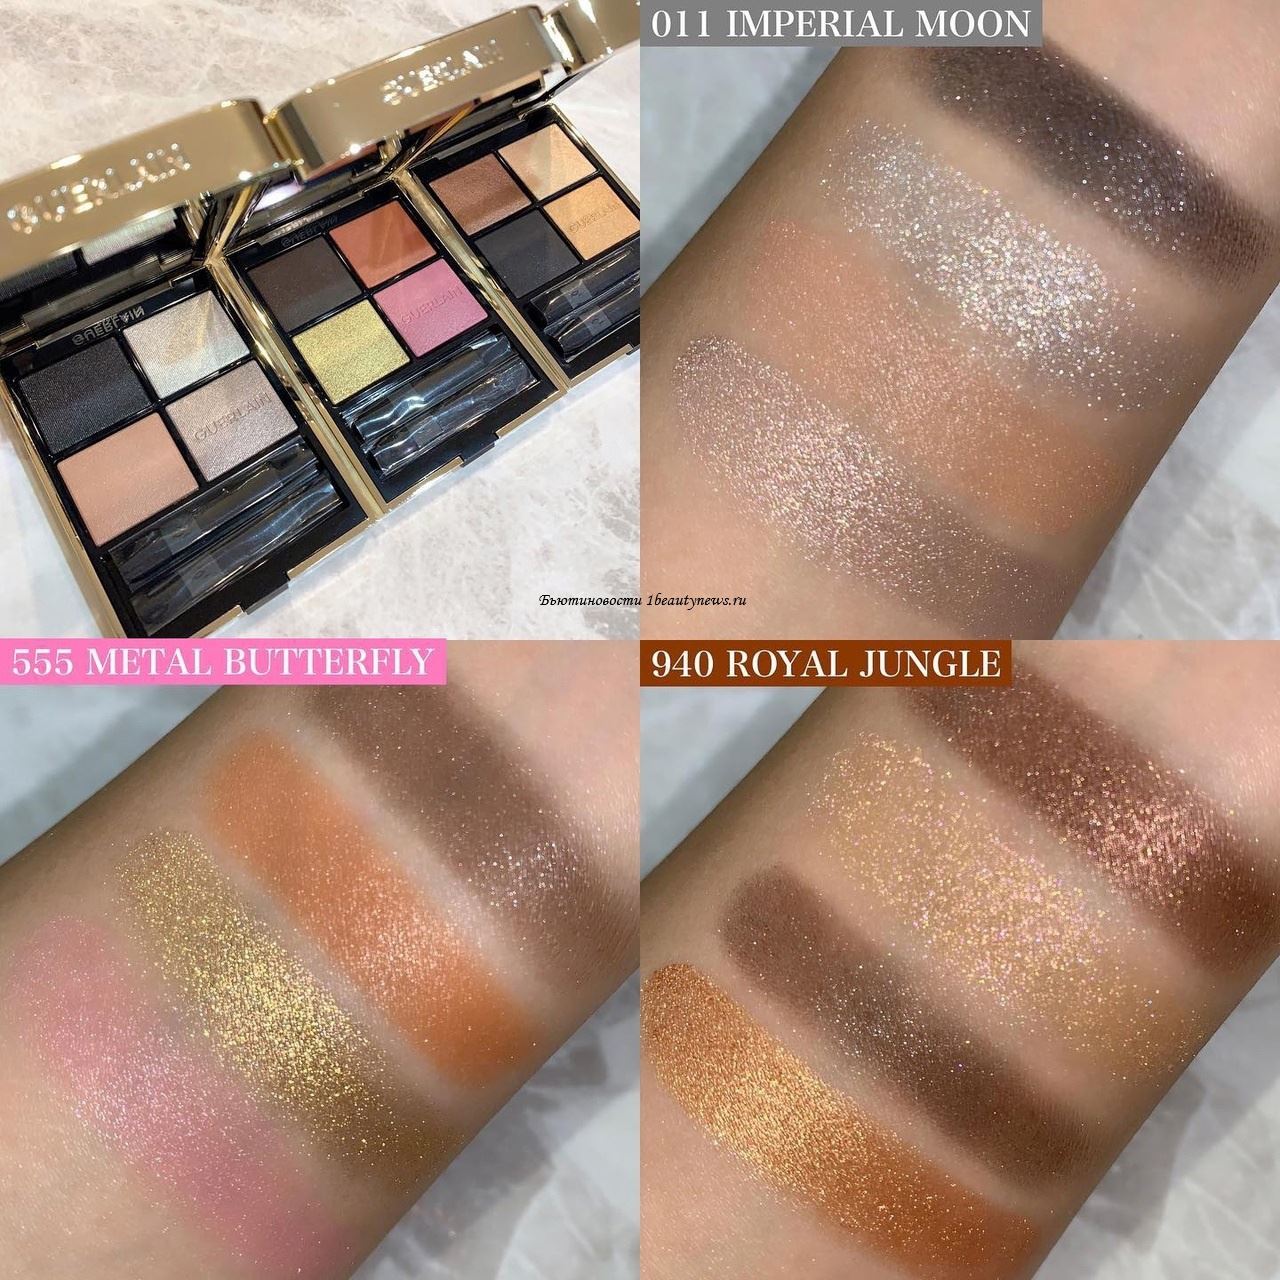 Guerlain Ombres G Eyeshadow Palette 2022 - Swatches